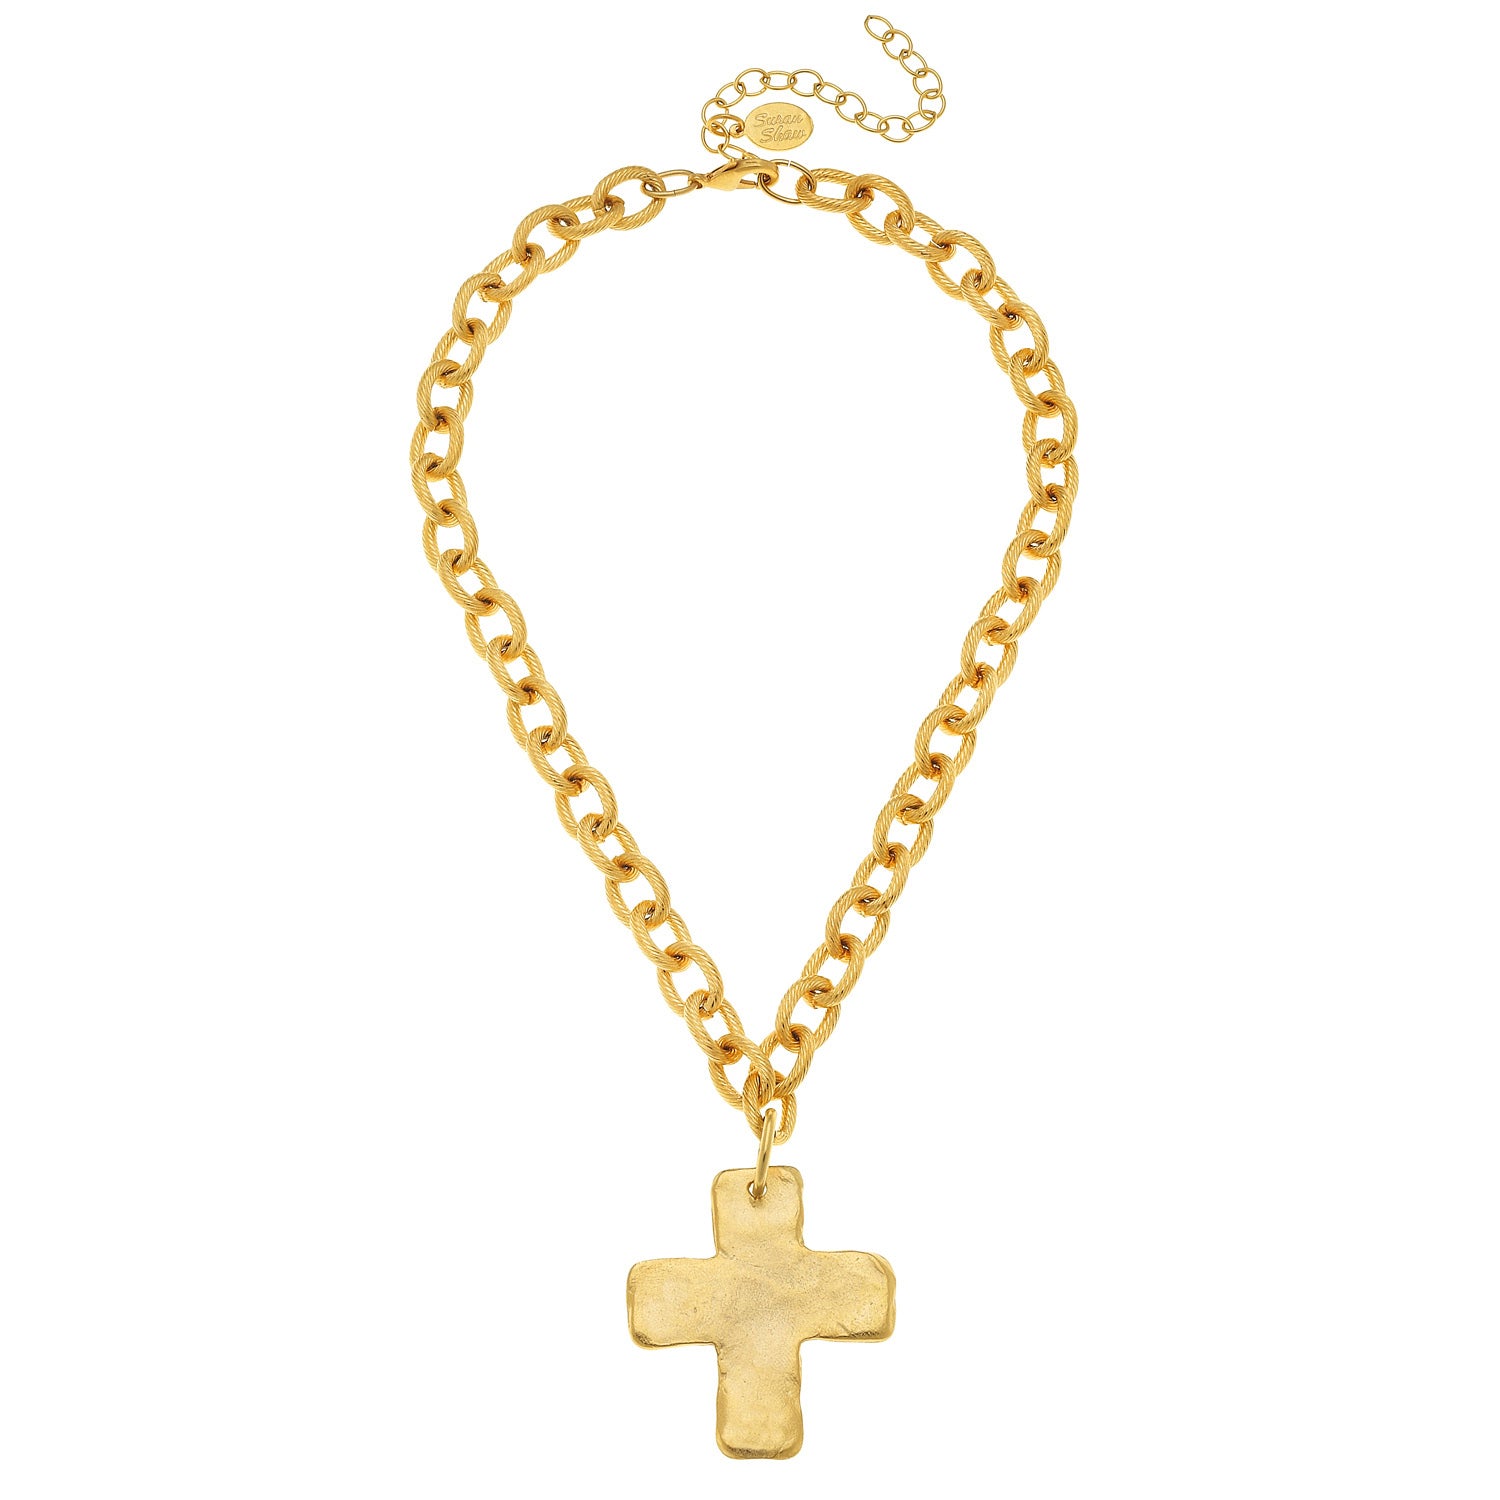 Susan Shaw Large Cross Pendant Necklace with Medium Link Chain, Gold Plated 20"